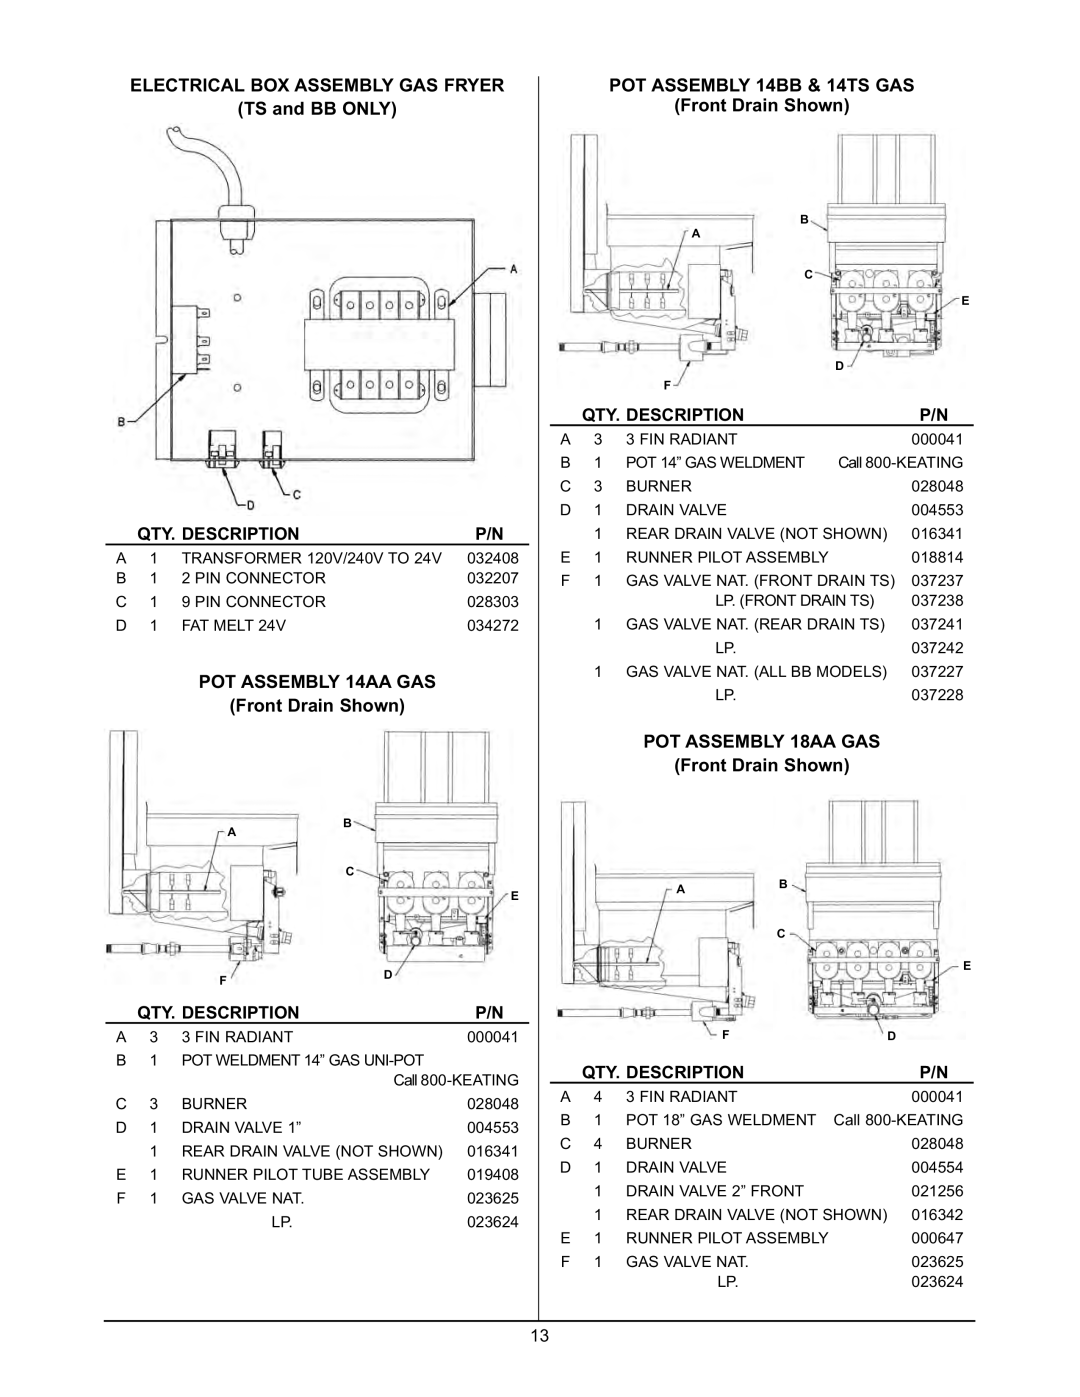 Keating Of Chicago 2000 warranty Electrical BOX Assembly GAS Fryer, POT Assembly 14AA GAS, POT Assembly 14BB & 14TS GAS 